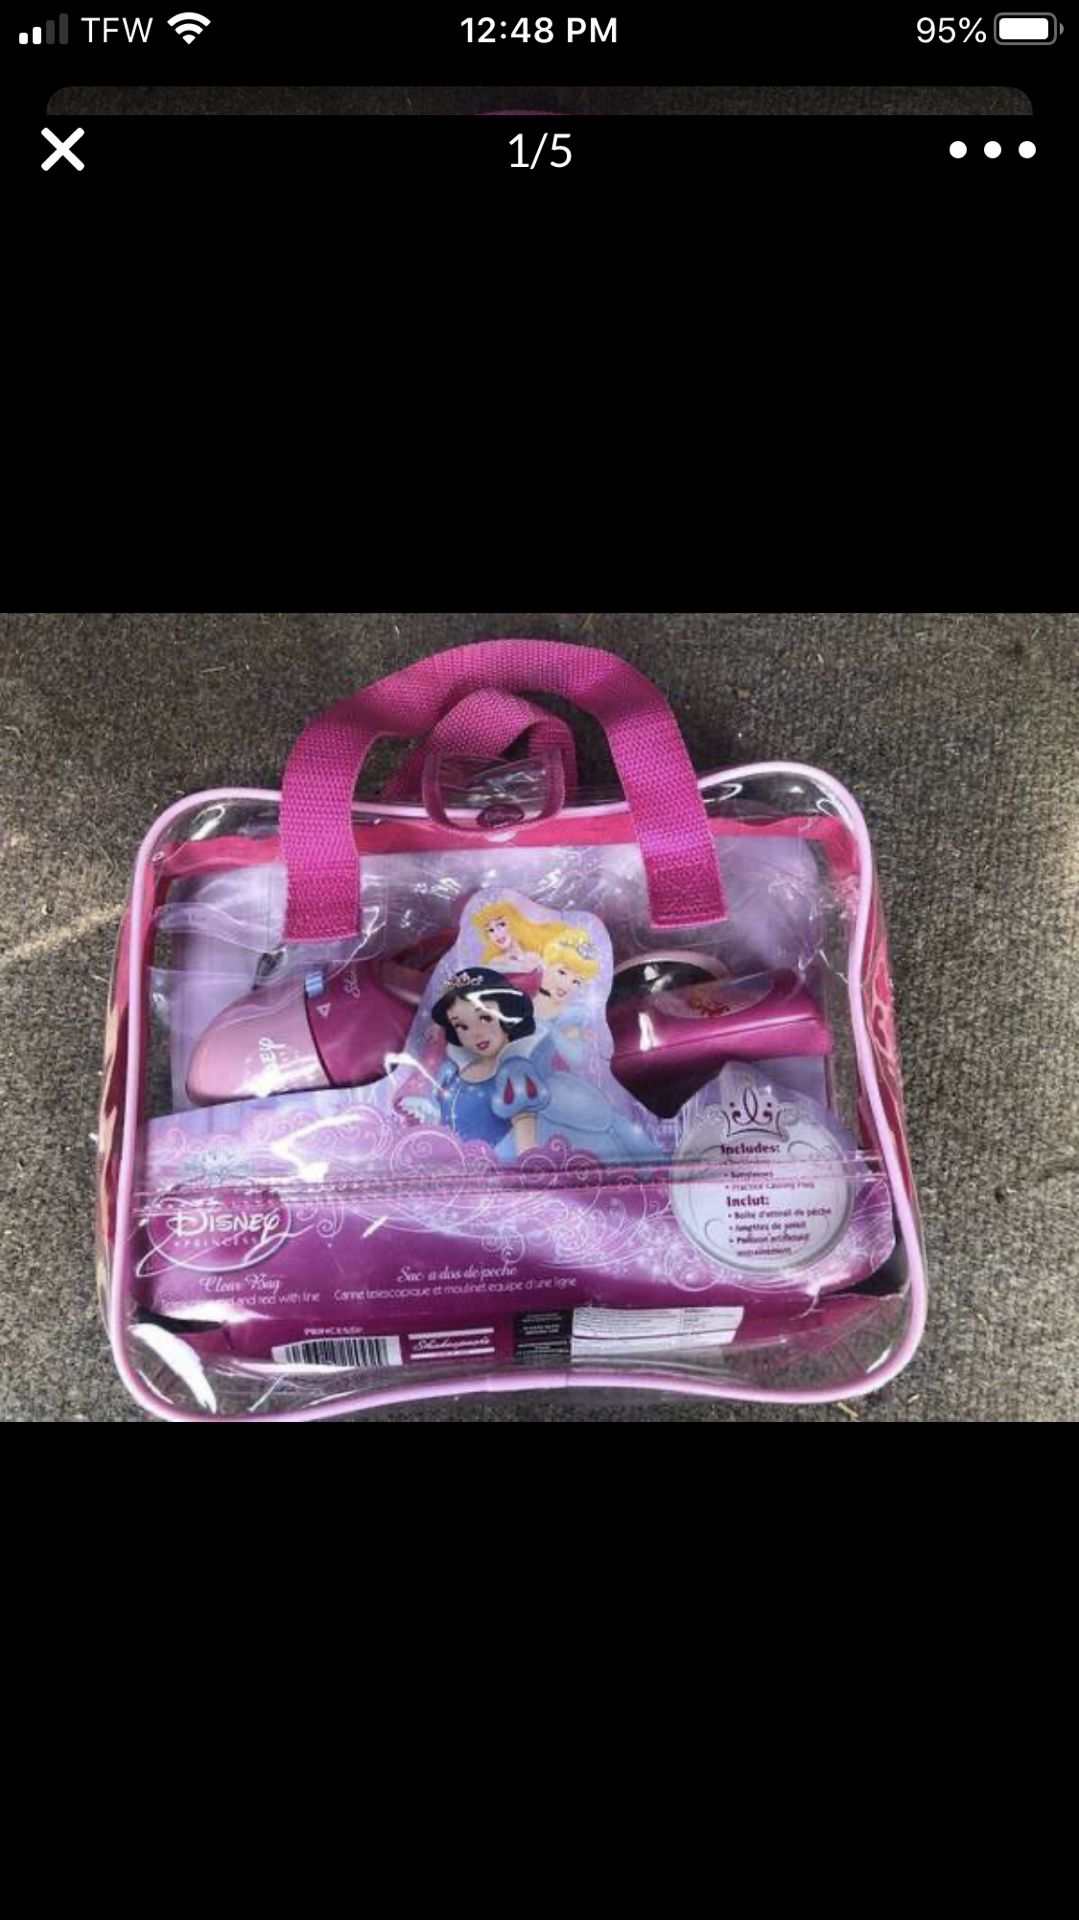 Shakespeare Youth Fishing Kits Disney Princess Purse Like New ONLY $20 RETAILS OVER $30